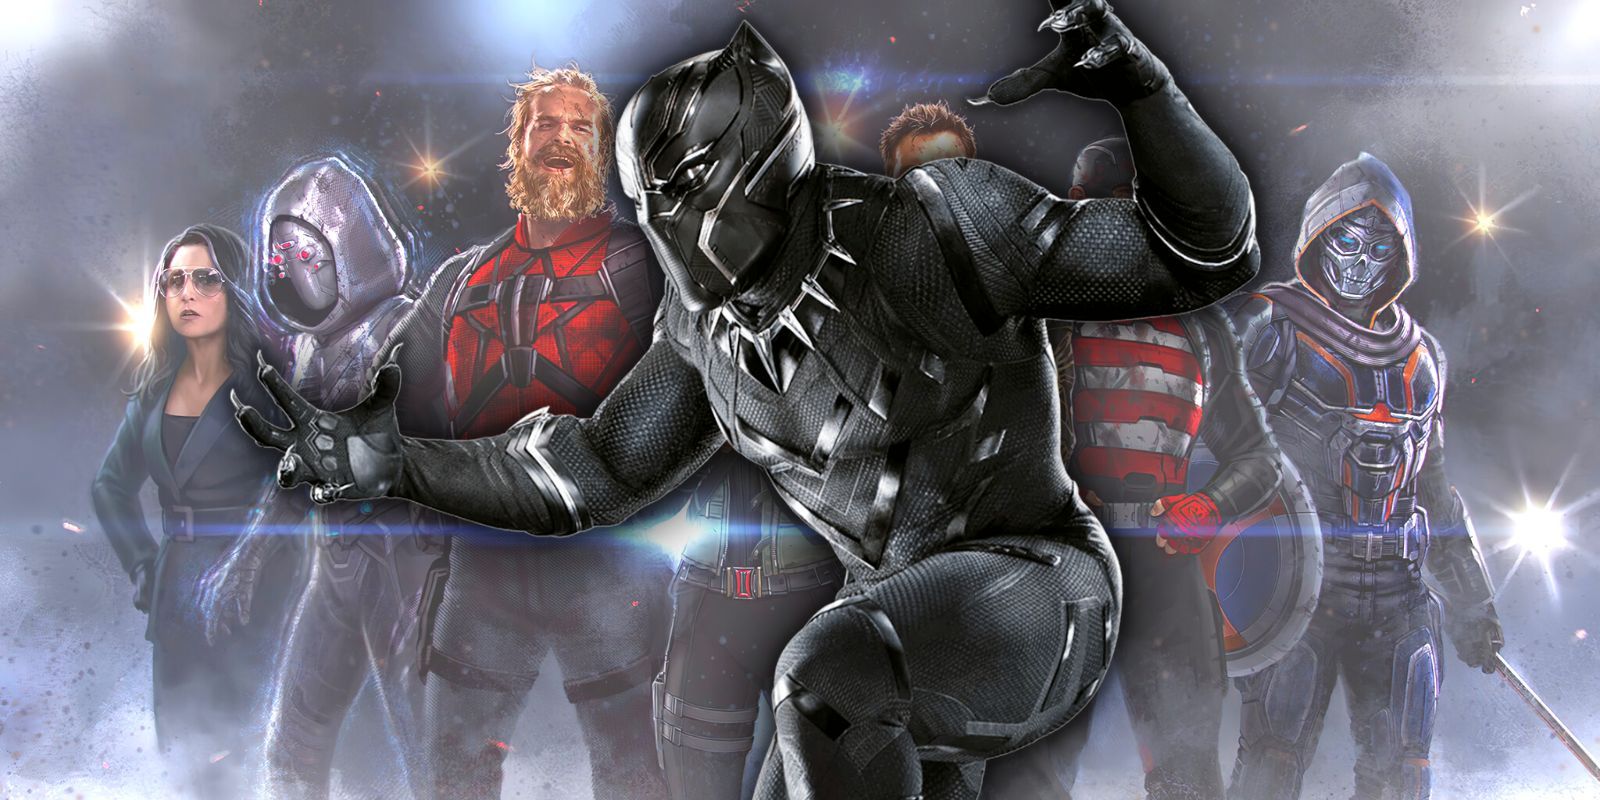 Black Panther backed by the MCU's Thunderbolts team